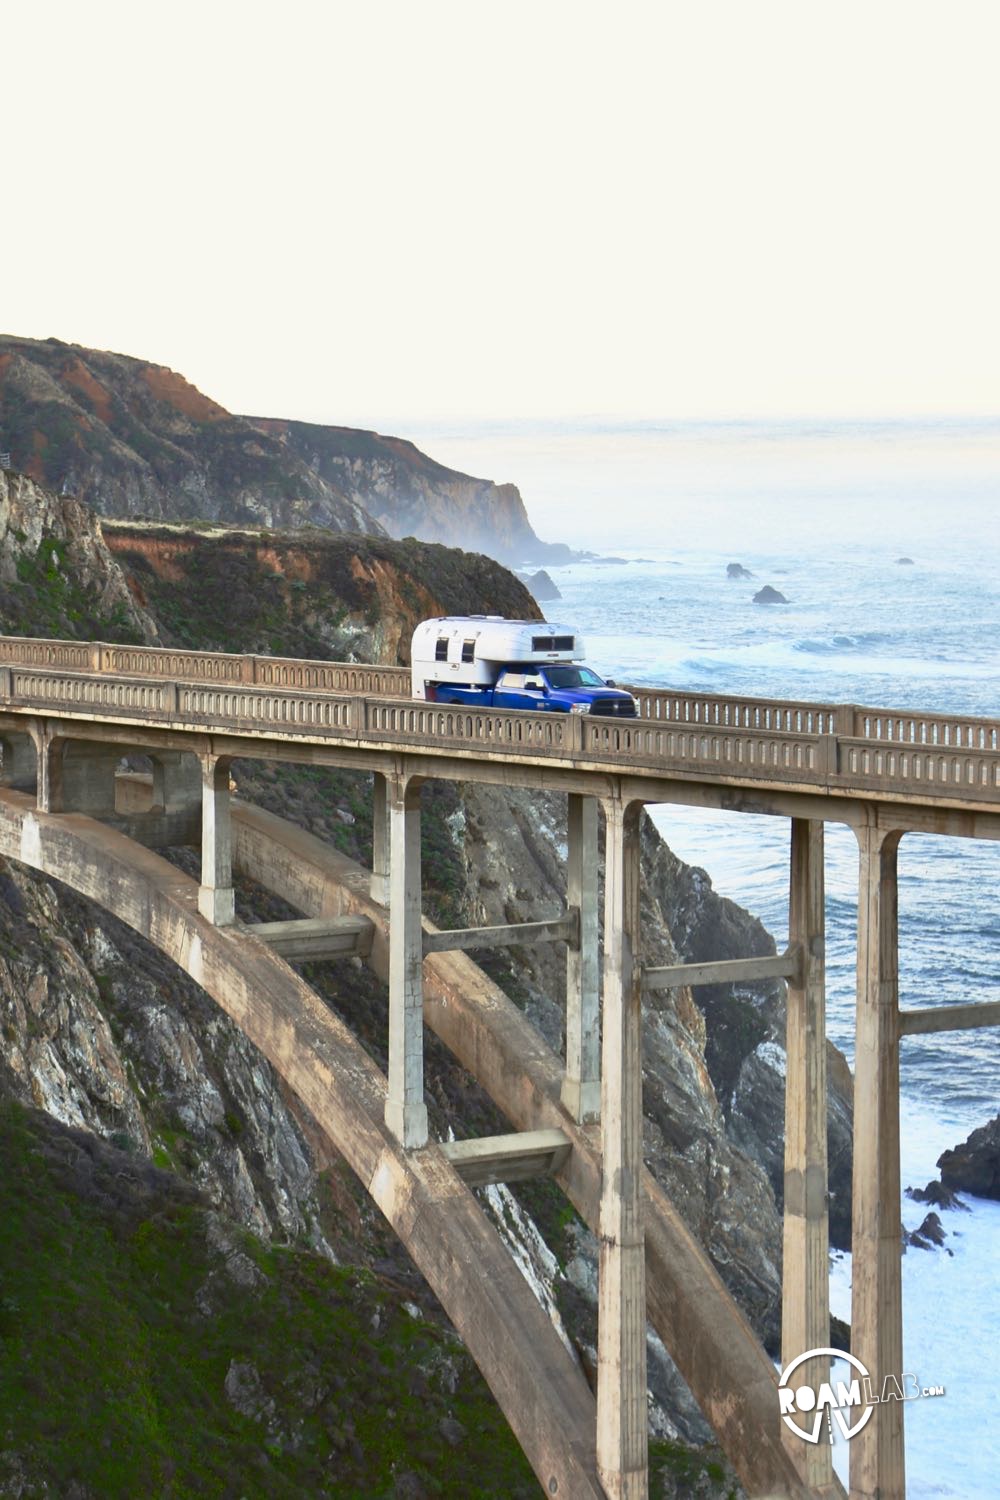 1970 Avion C11 truck camper crossing the Bixby Bridge in Big Sur with the ocean in the background.